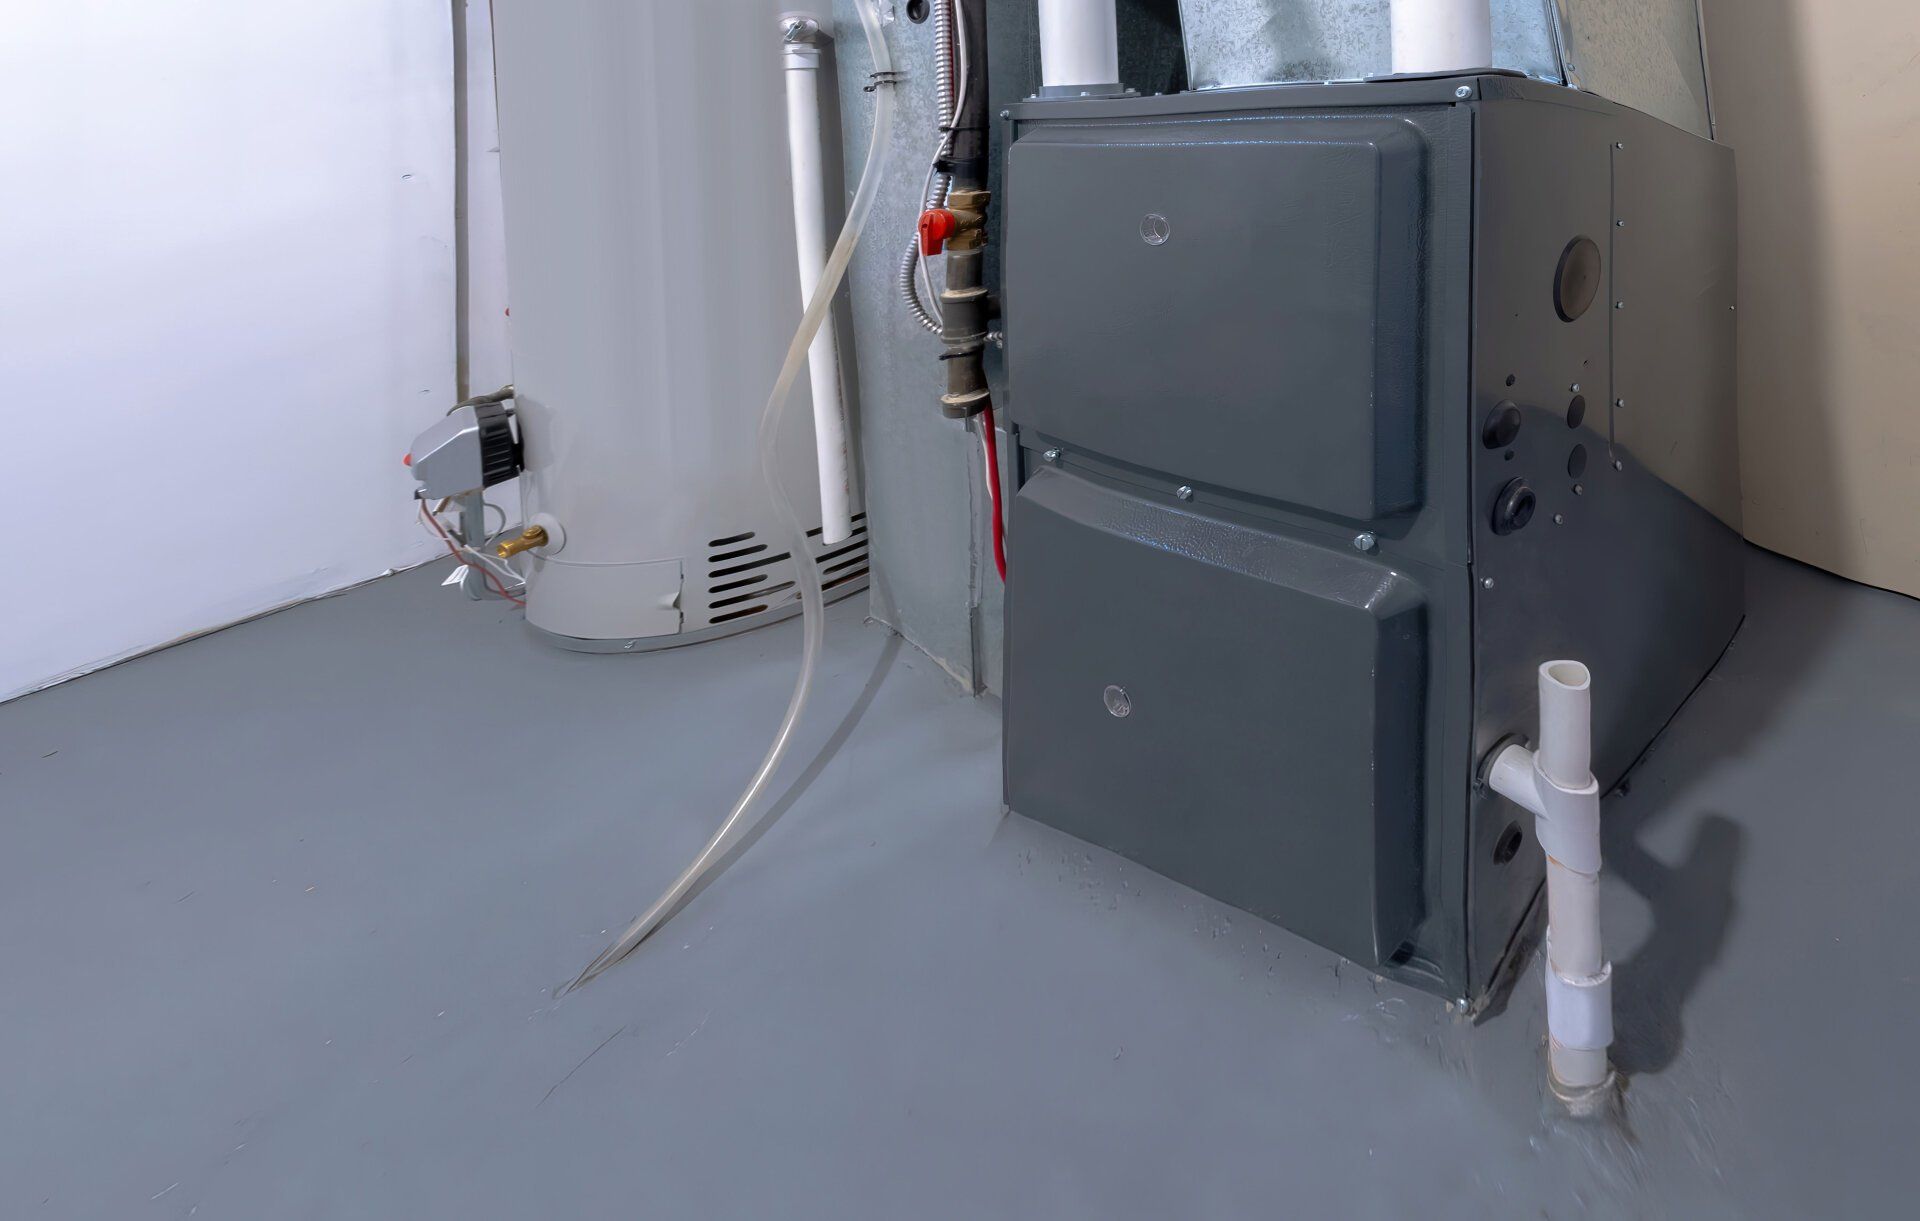 How Do You Know If Your Furnace Fuse Is Blown